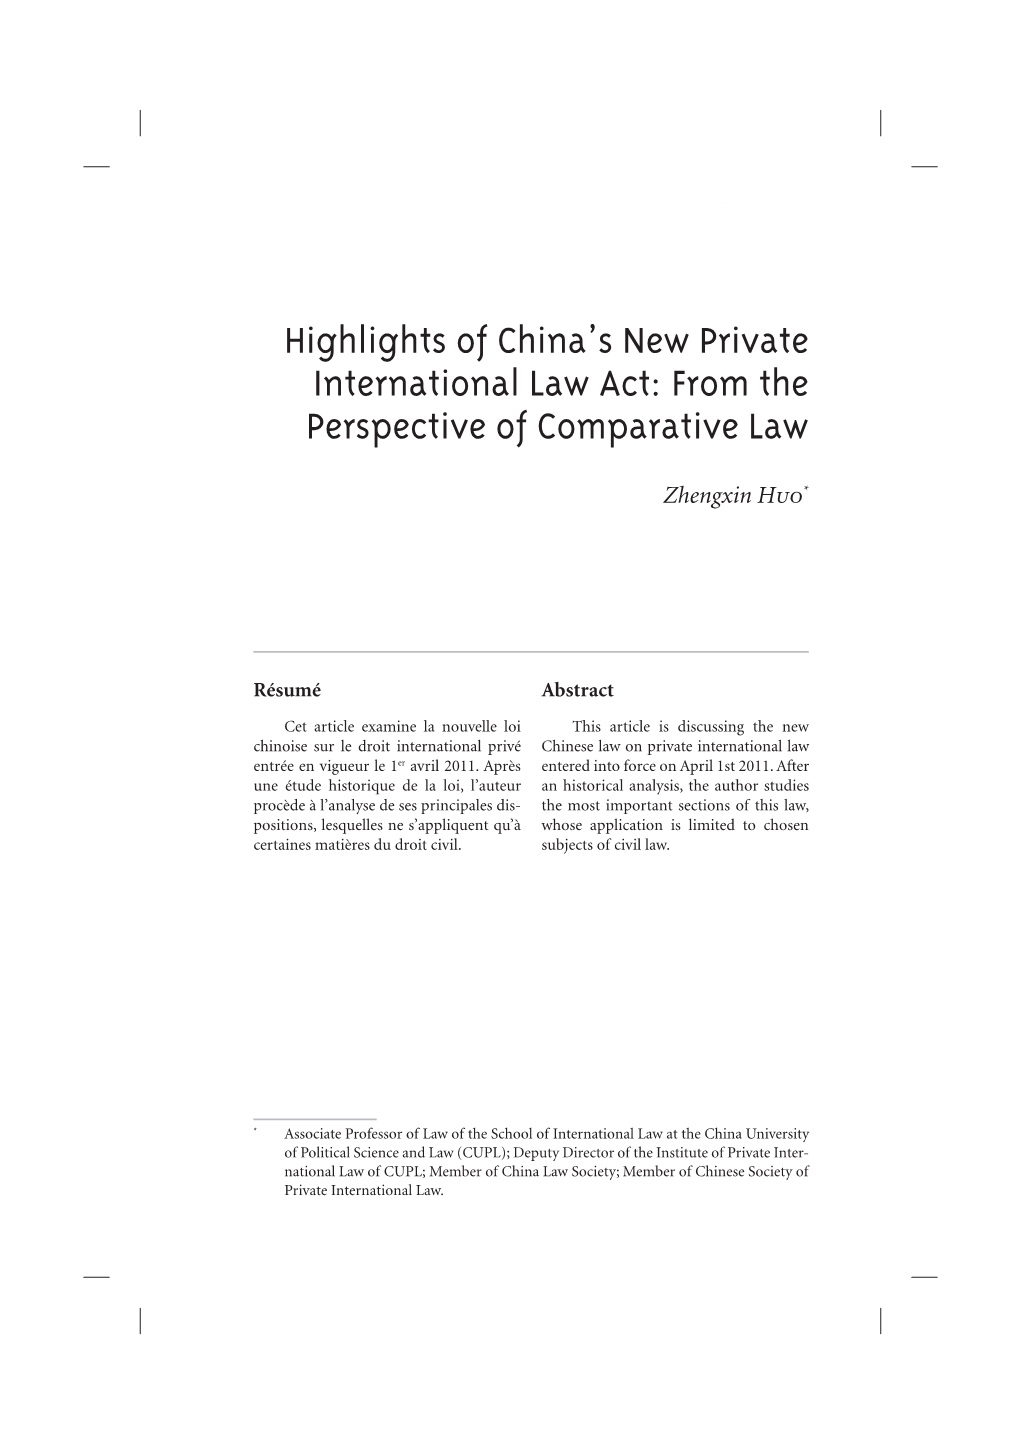 Highlights of China's New Private International Law Act: from The